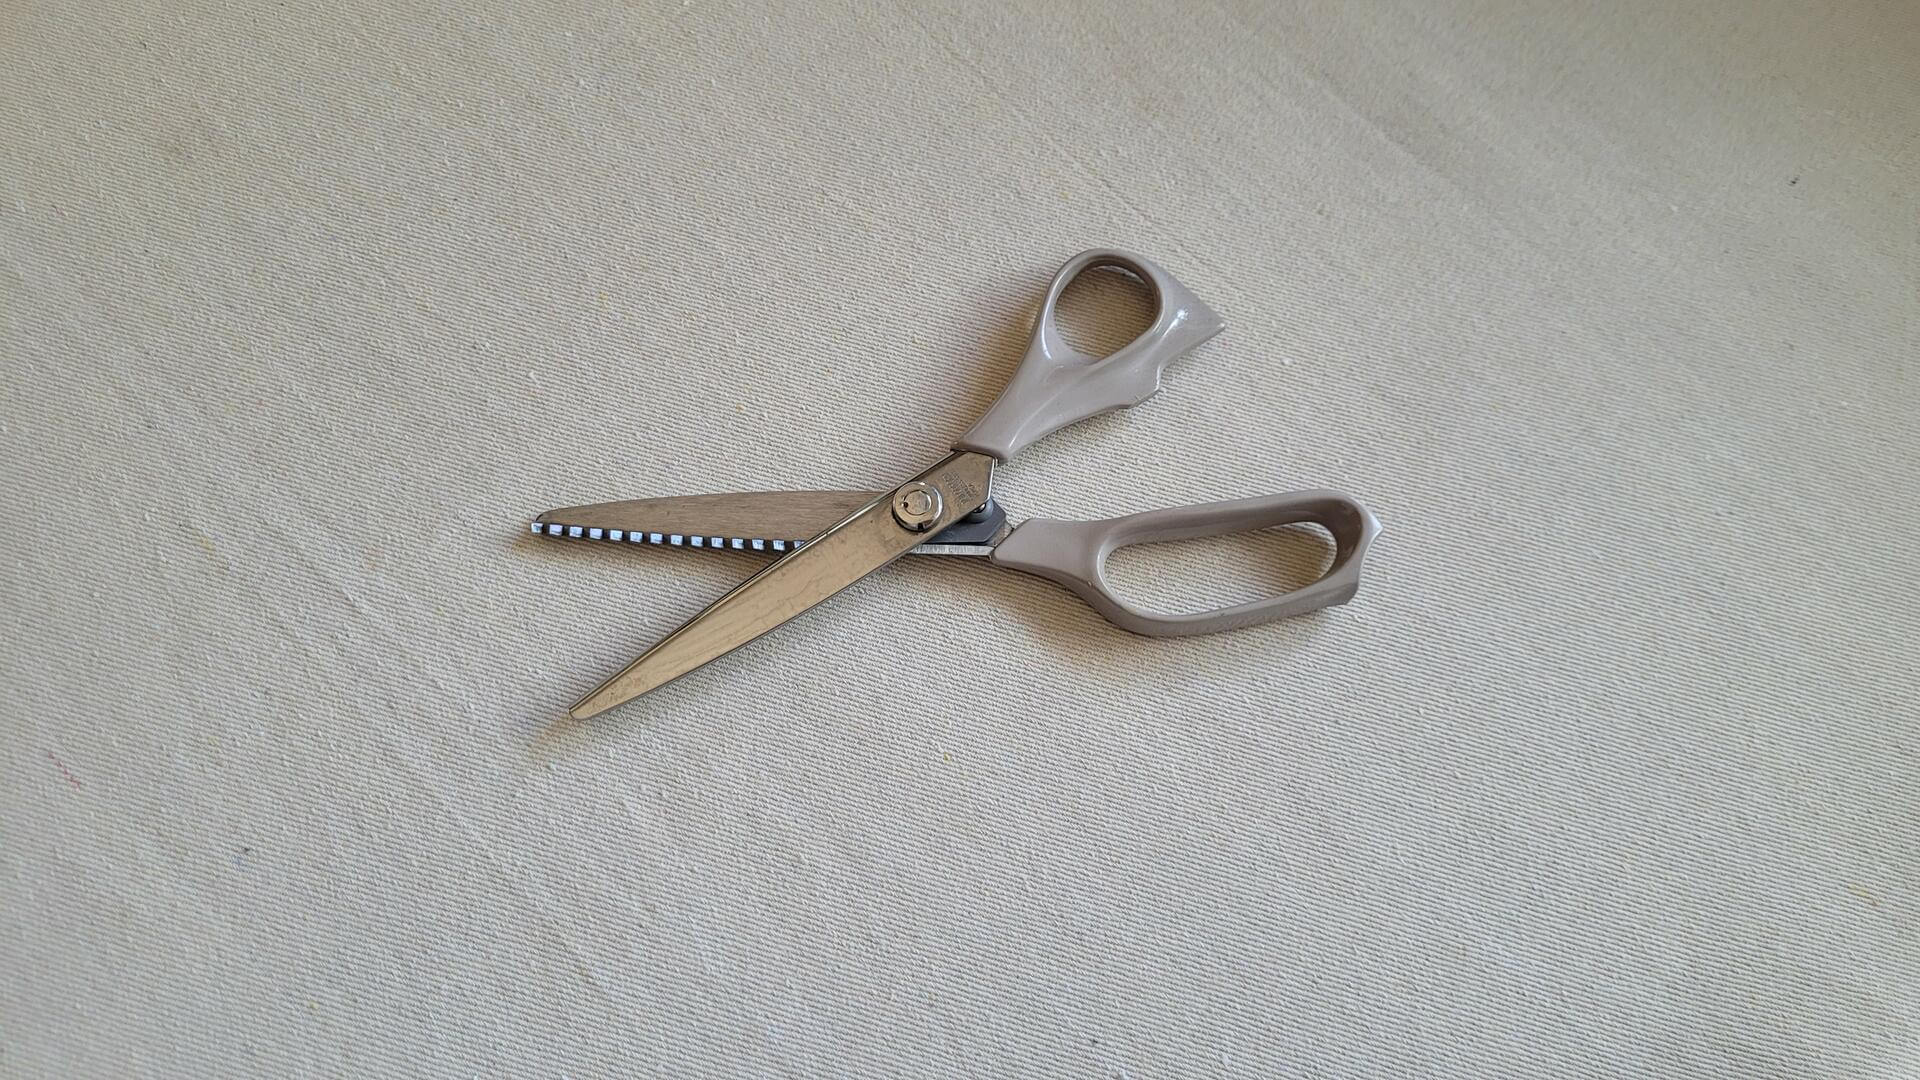 Tailorform stainless steel dressmaker and tailor pinking shears scissors 8 inches long. Vintage made in Korea quality sewing and upholstery fabric cutting tools